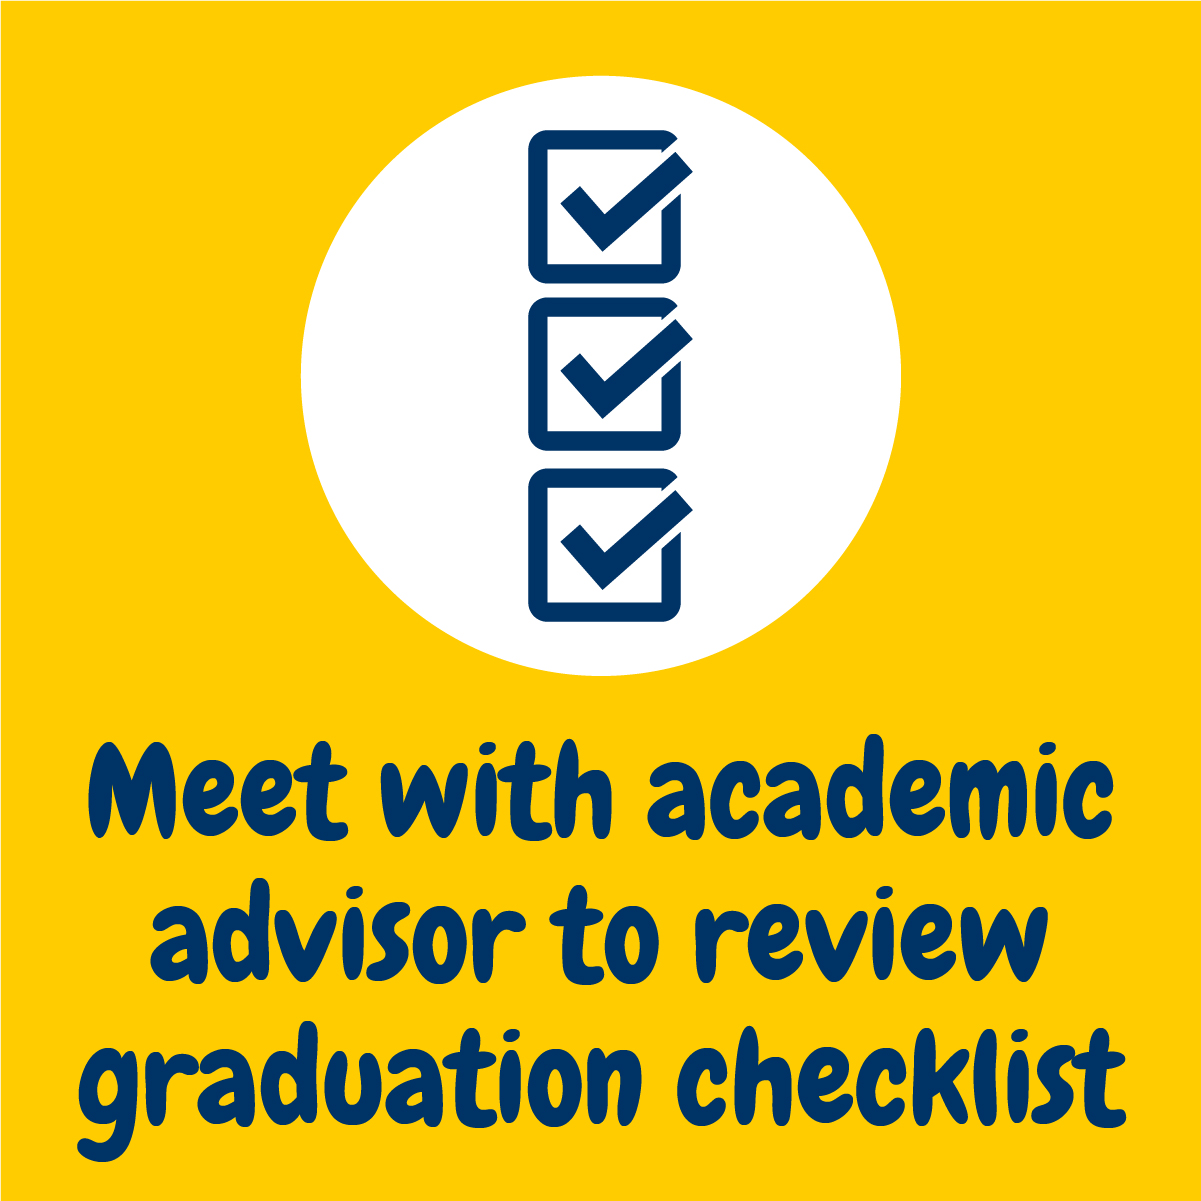 Meet with academic advisor to review graduation checklist